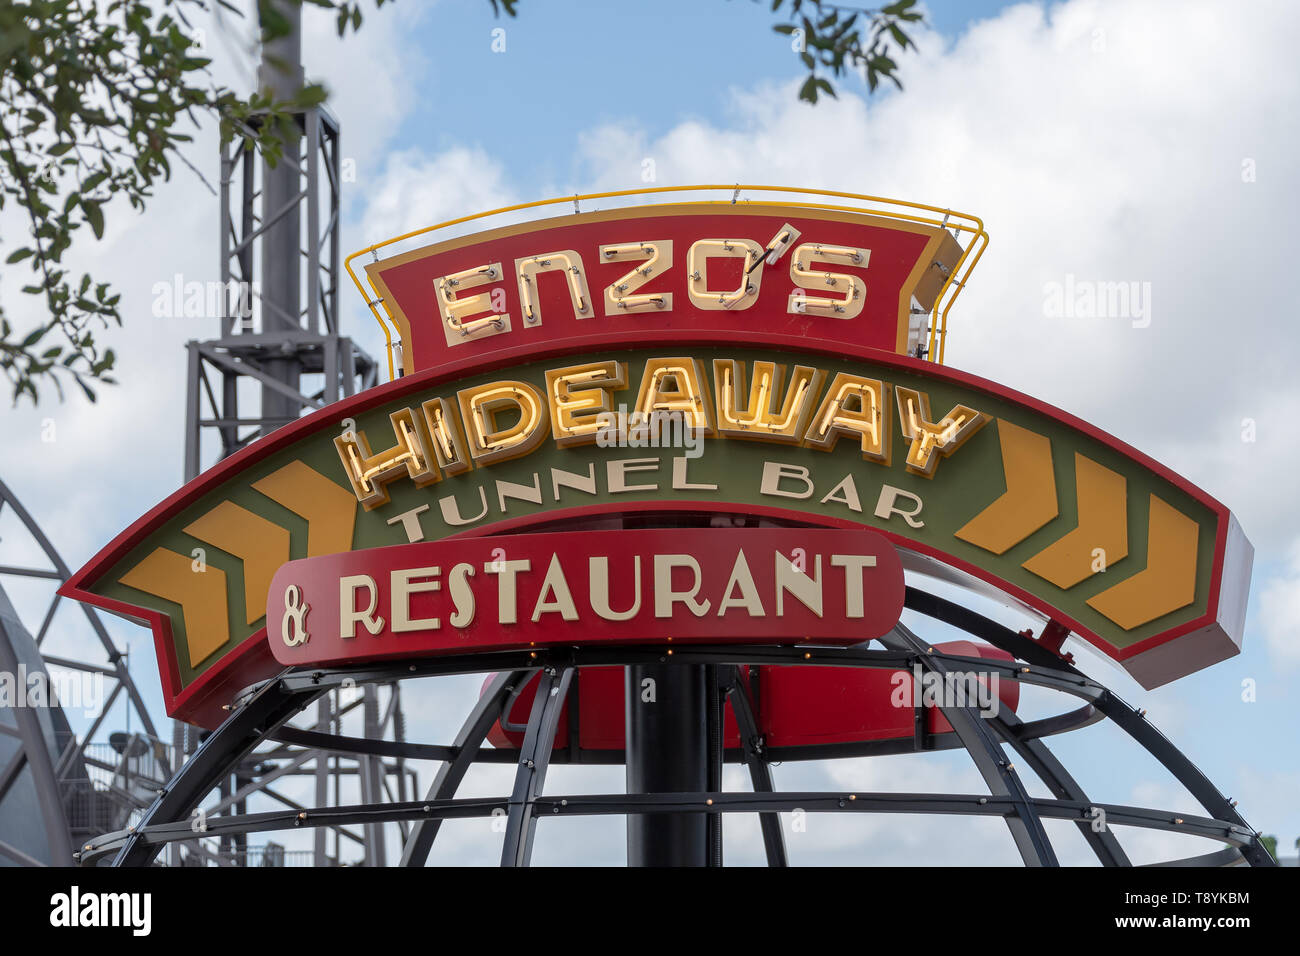 ORLANDO, USA: MAY 01 2019: Exterior image of the Enzo's tunnel bar resturant sign Stock Photo